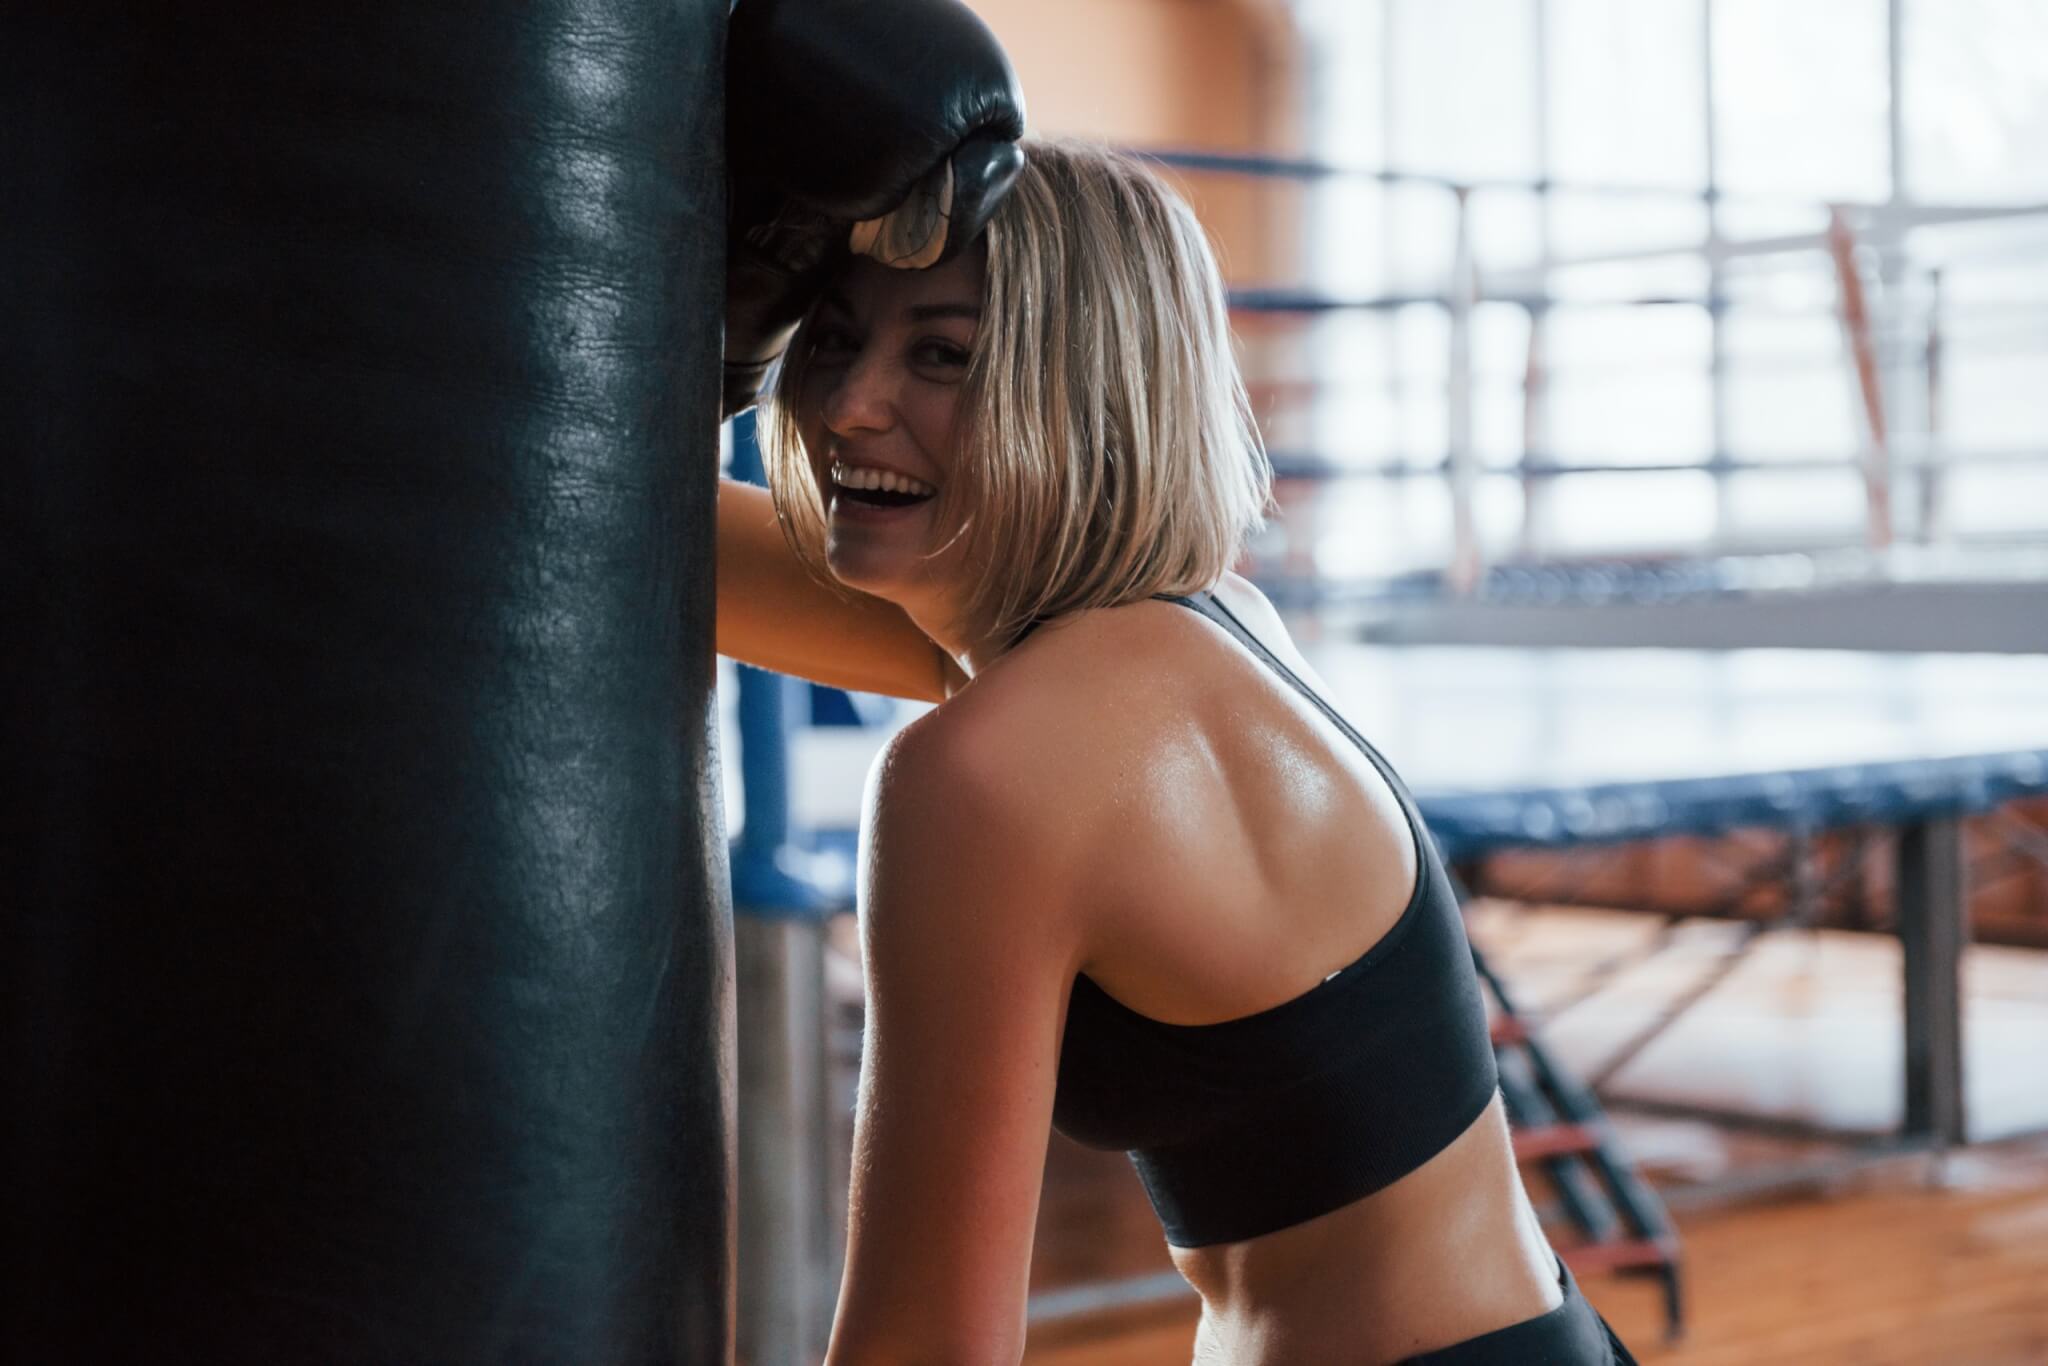 Woman at the gym laughing after finishing a strenuous boxing exercise